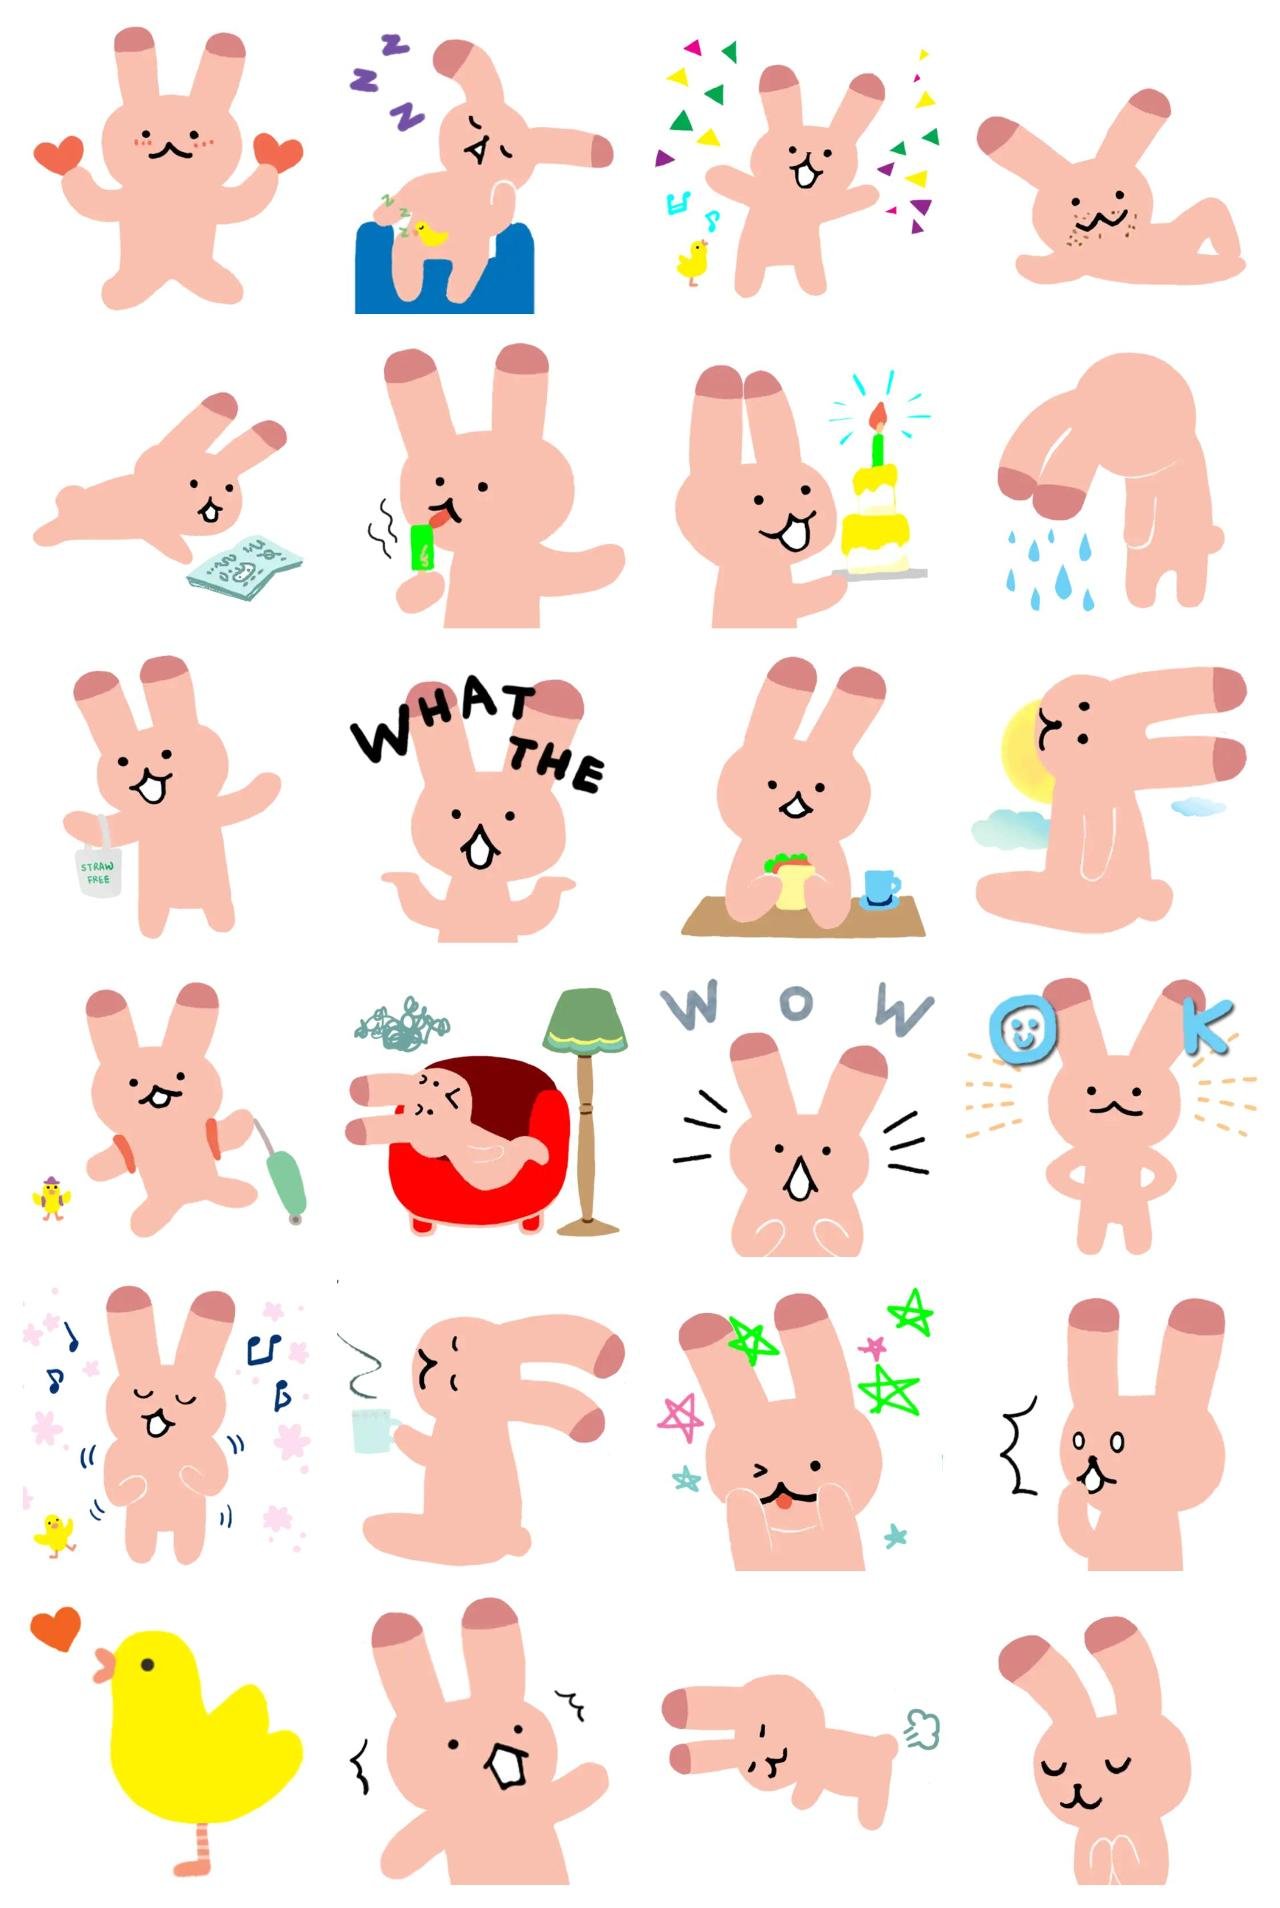 Happy Rabbit Soo 1 Animals sticker pack for Whatsapp, Telegram, Signal, and others chatting and message apps